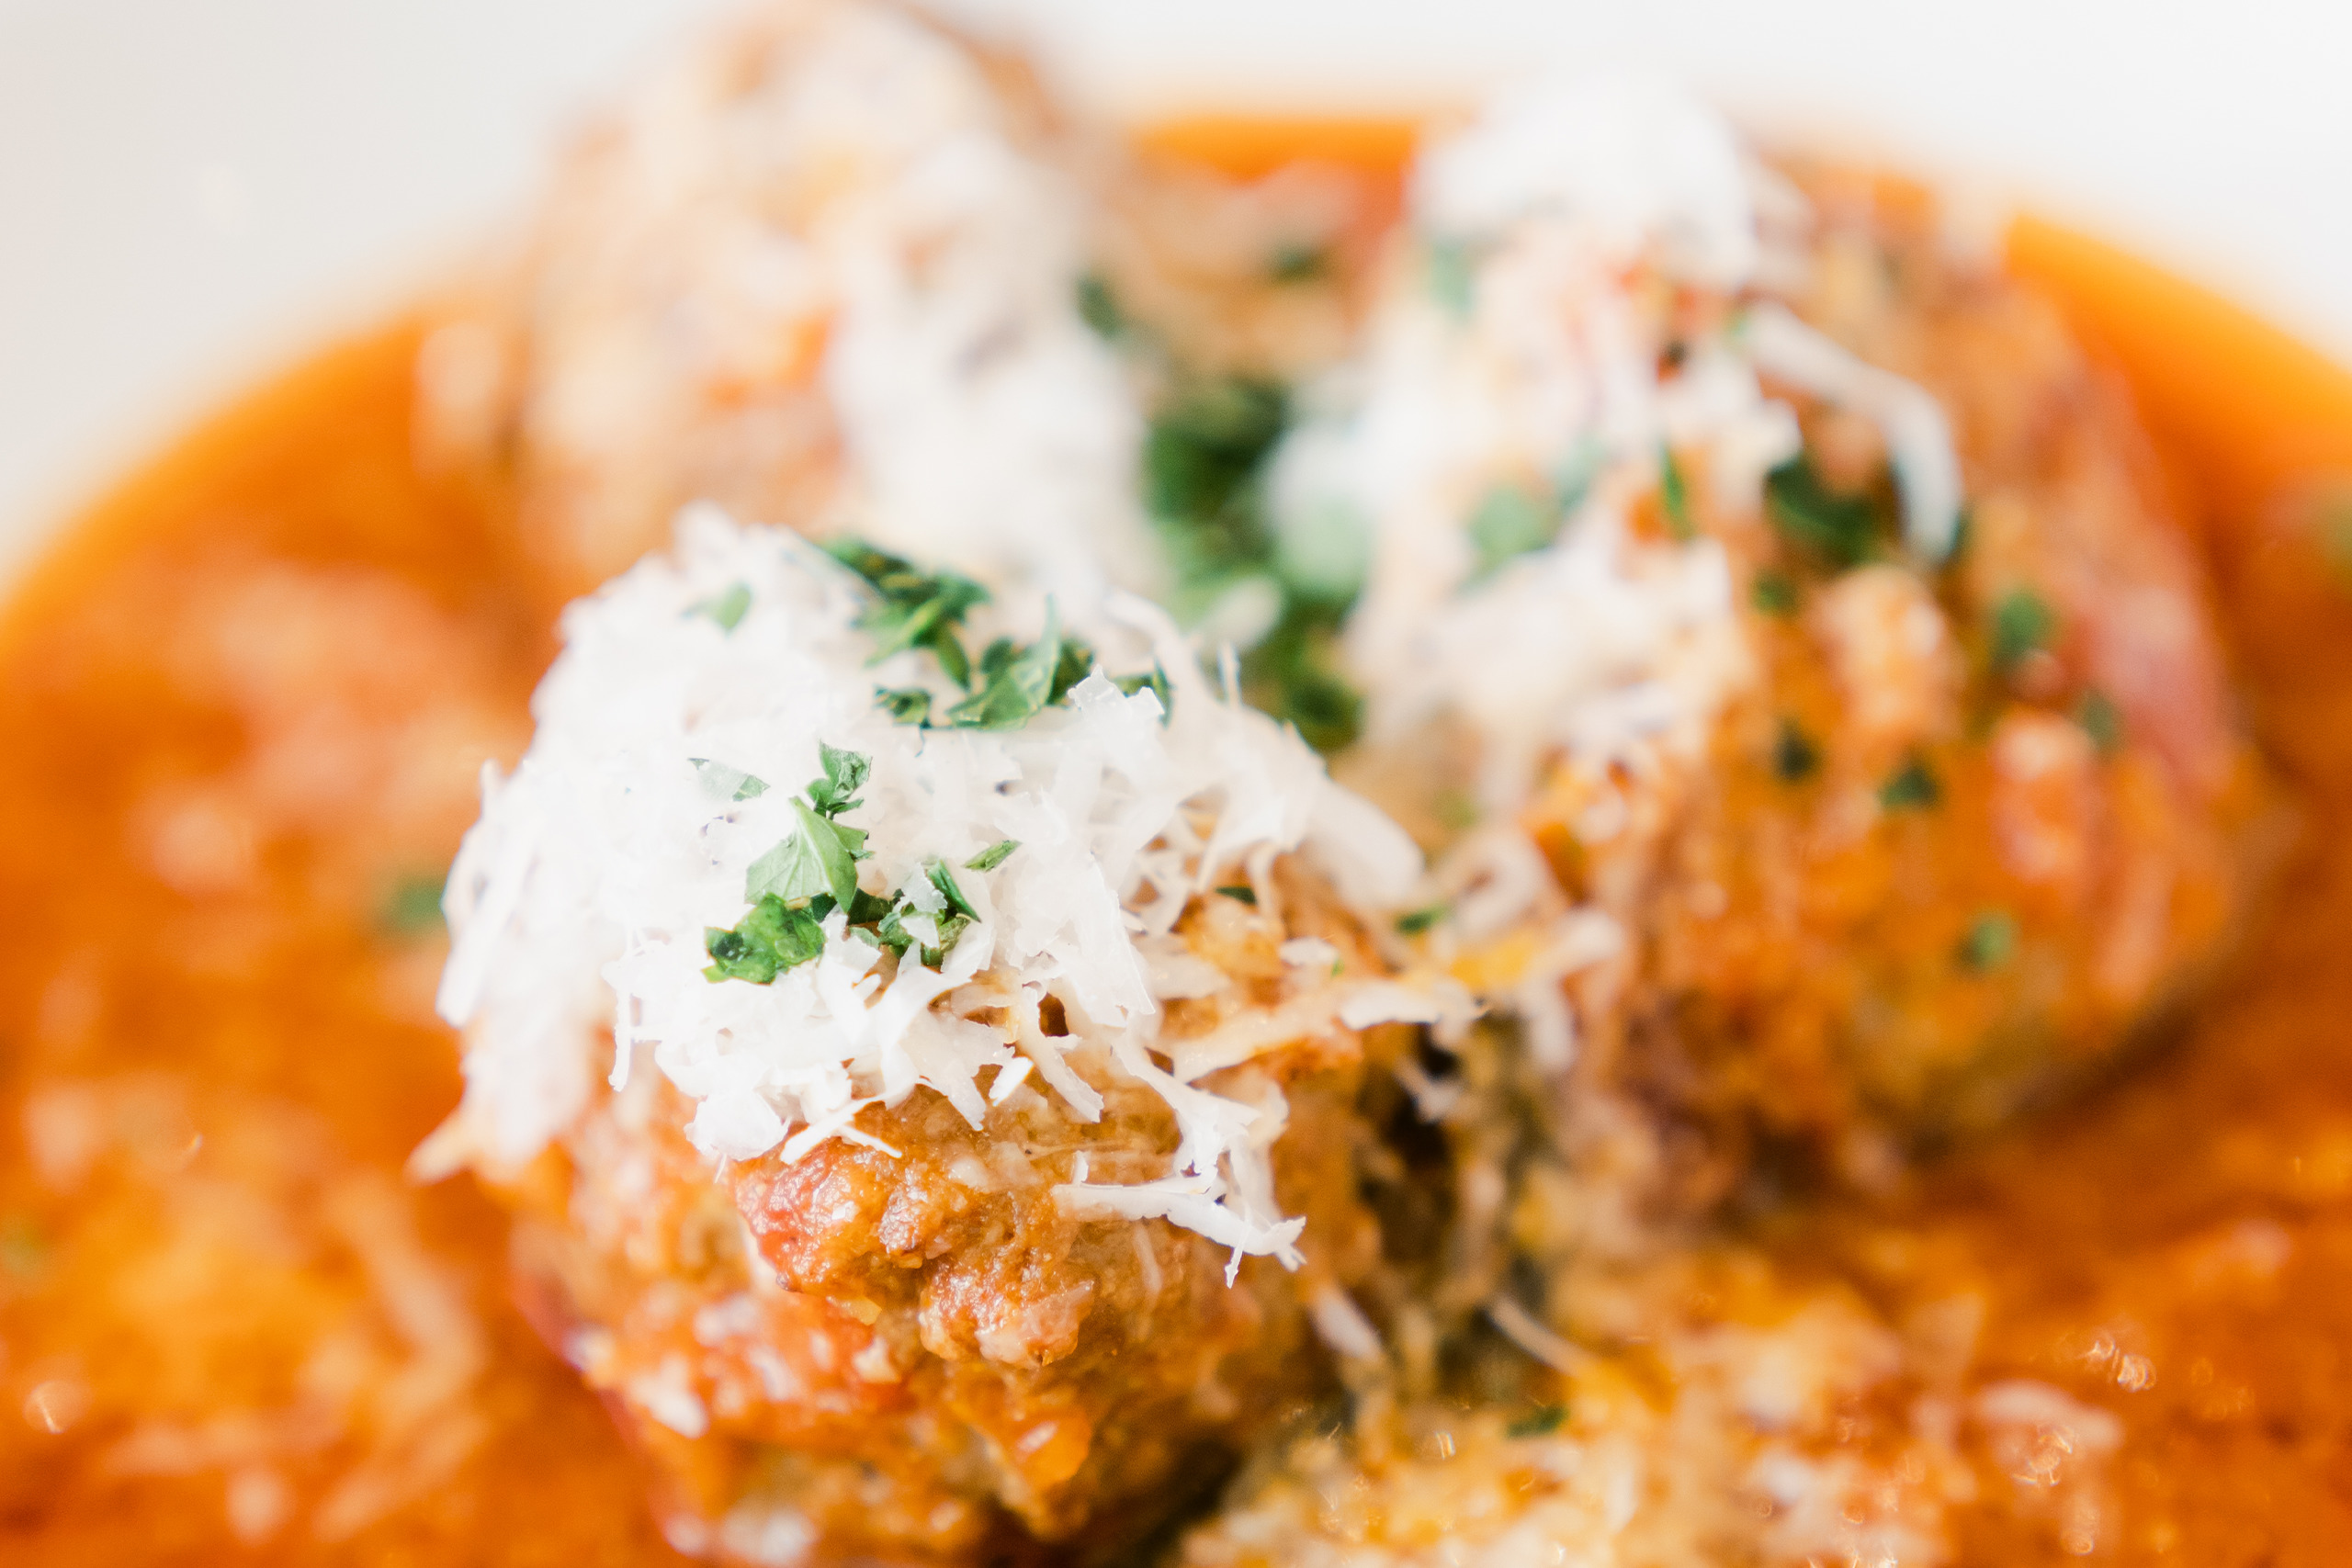 Mozzarella meatballs in red sauce for a wedding at The Grand America Hotel.